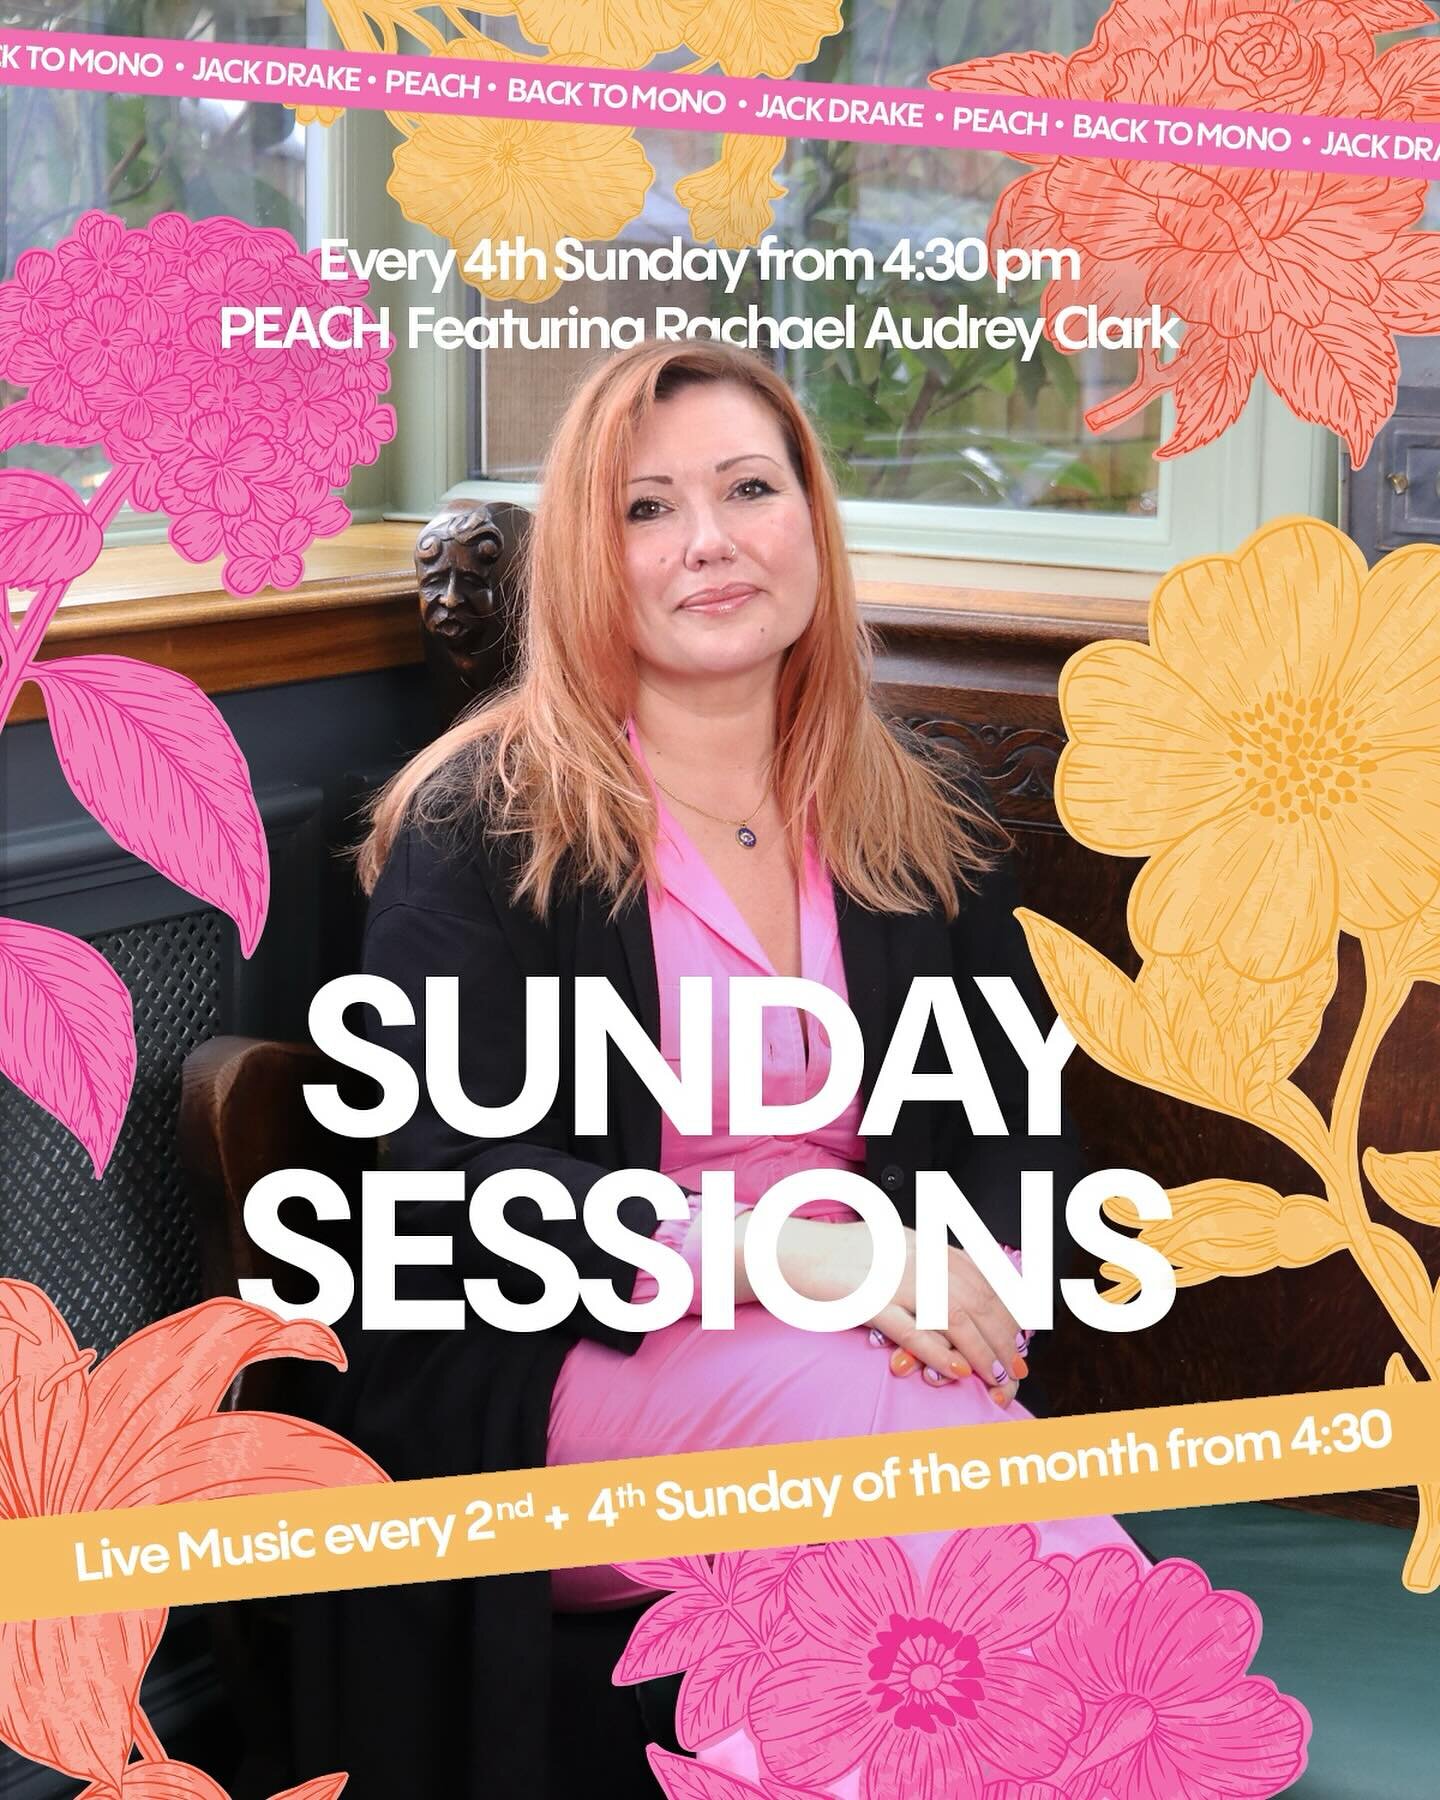 Live Music is back @ The Tower ✨🌺

Join us in the beer garden (when weather allows ☀️) for DJ sets from @jackwd21 and @backtomonolincoln on the 2nd Sunday of every month and @peach_band_ featuring our friend Rachael Audrey Clarke on the 4th Sunday o